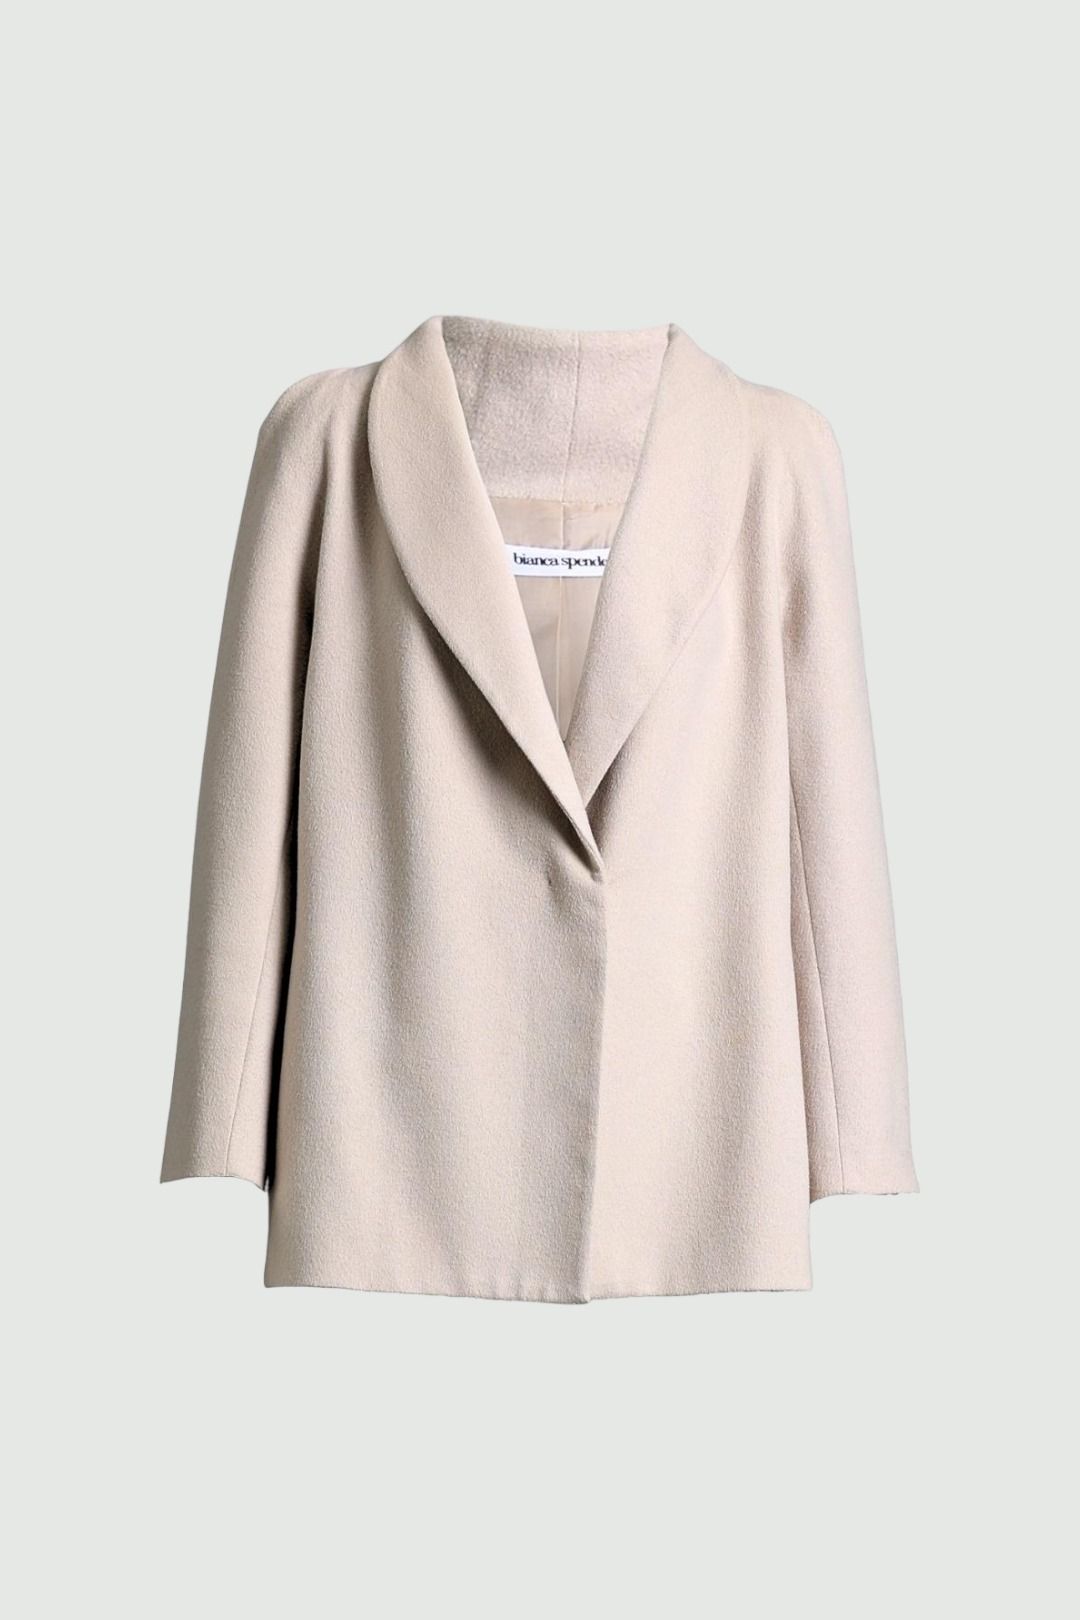 Hip Length Coat In Taupe